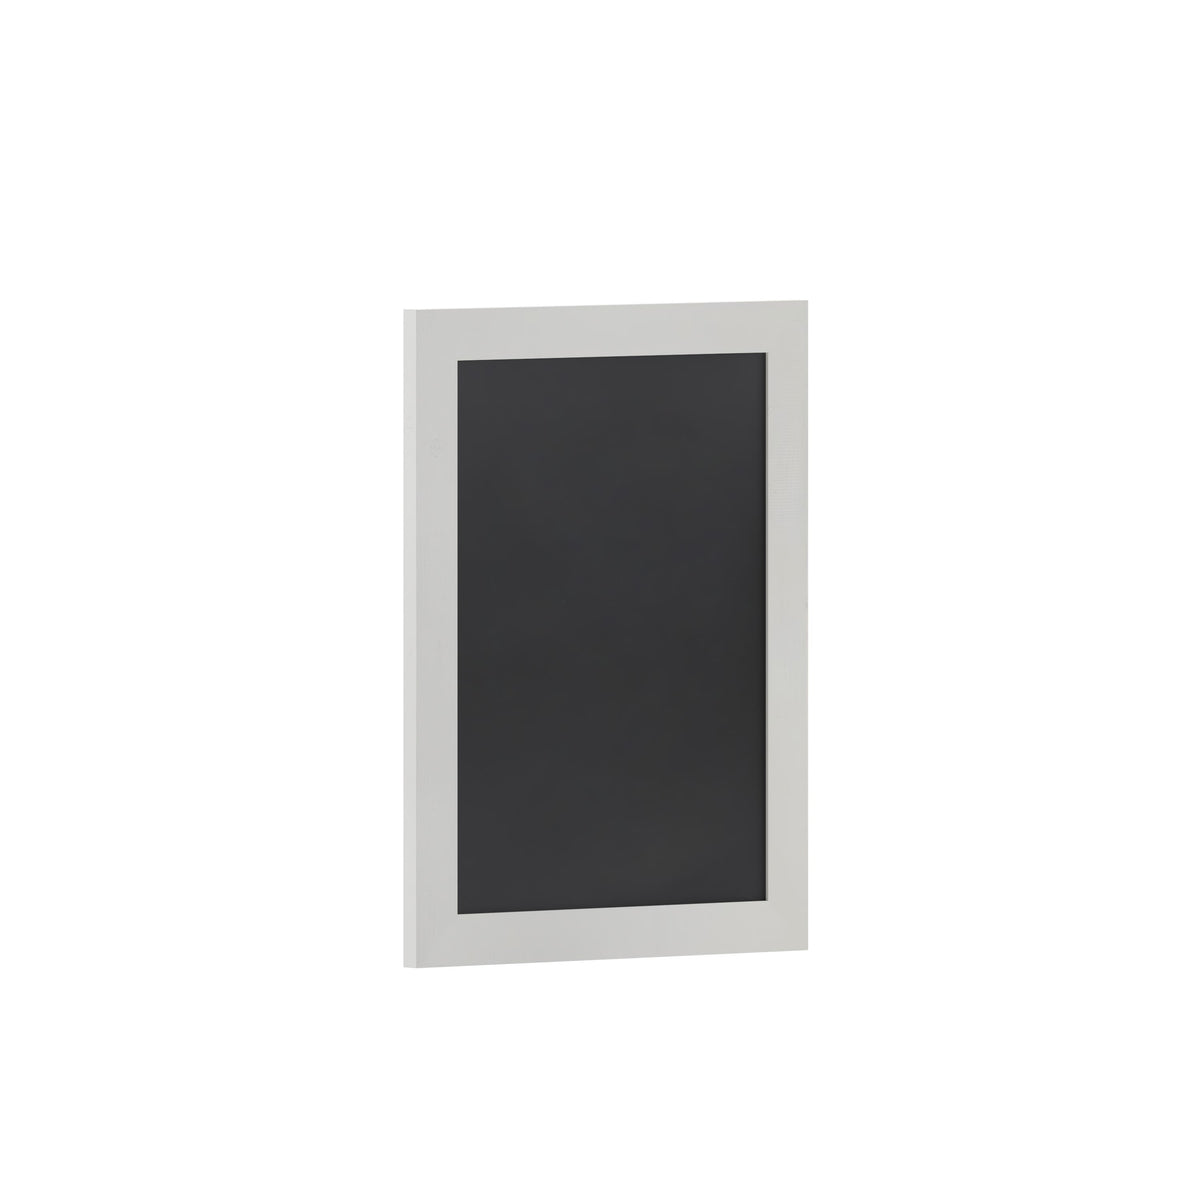 Solid White,18inchW x 0.75inchD x 24inchH |#| 18inch x 24inch Wall Mounted Magnetic Chalkboard with Wooden Frame -White